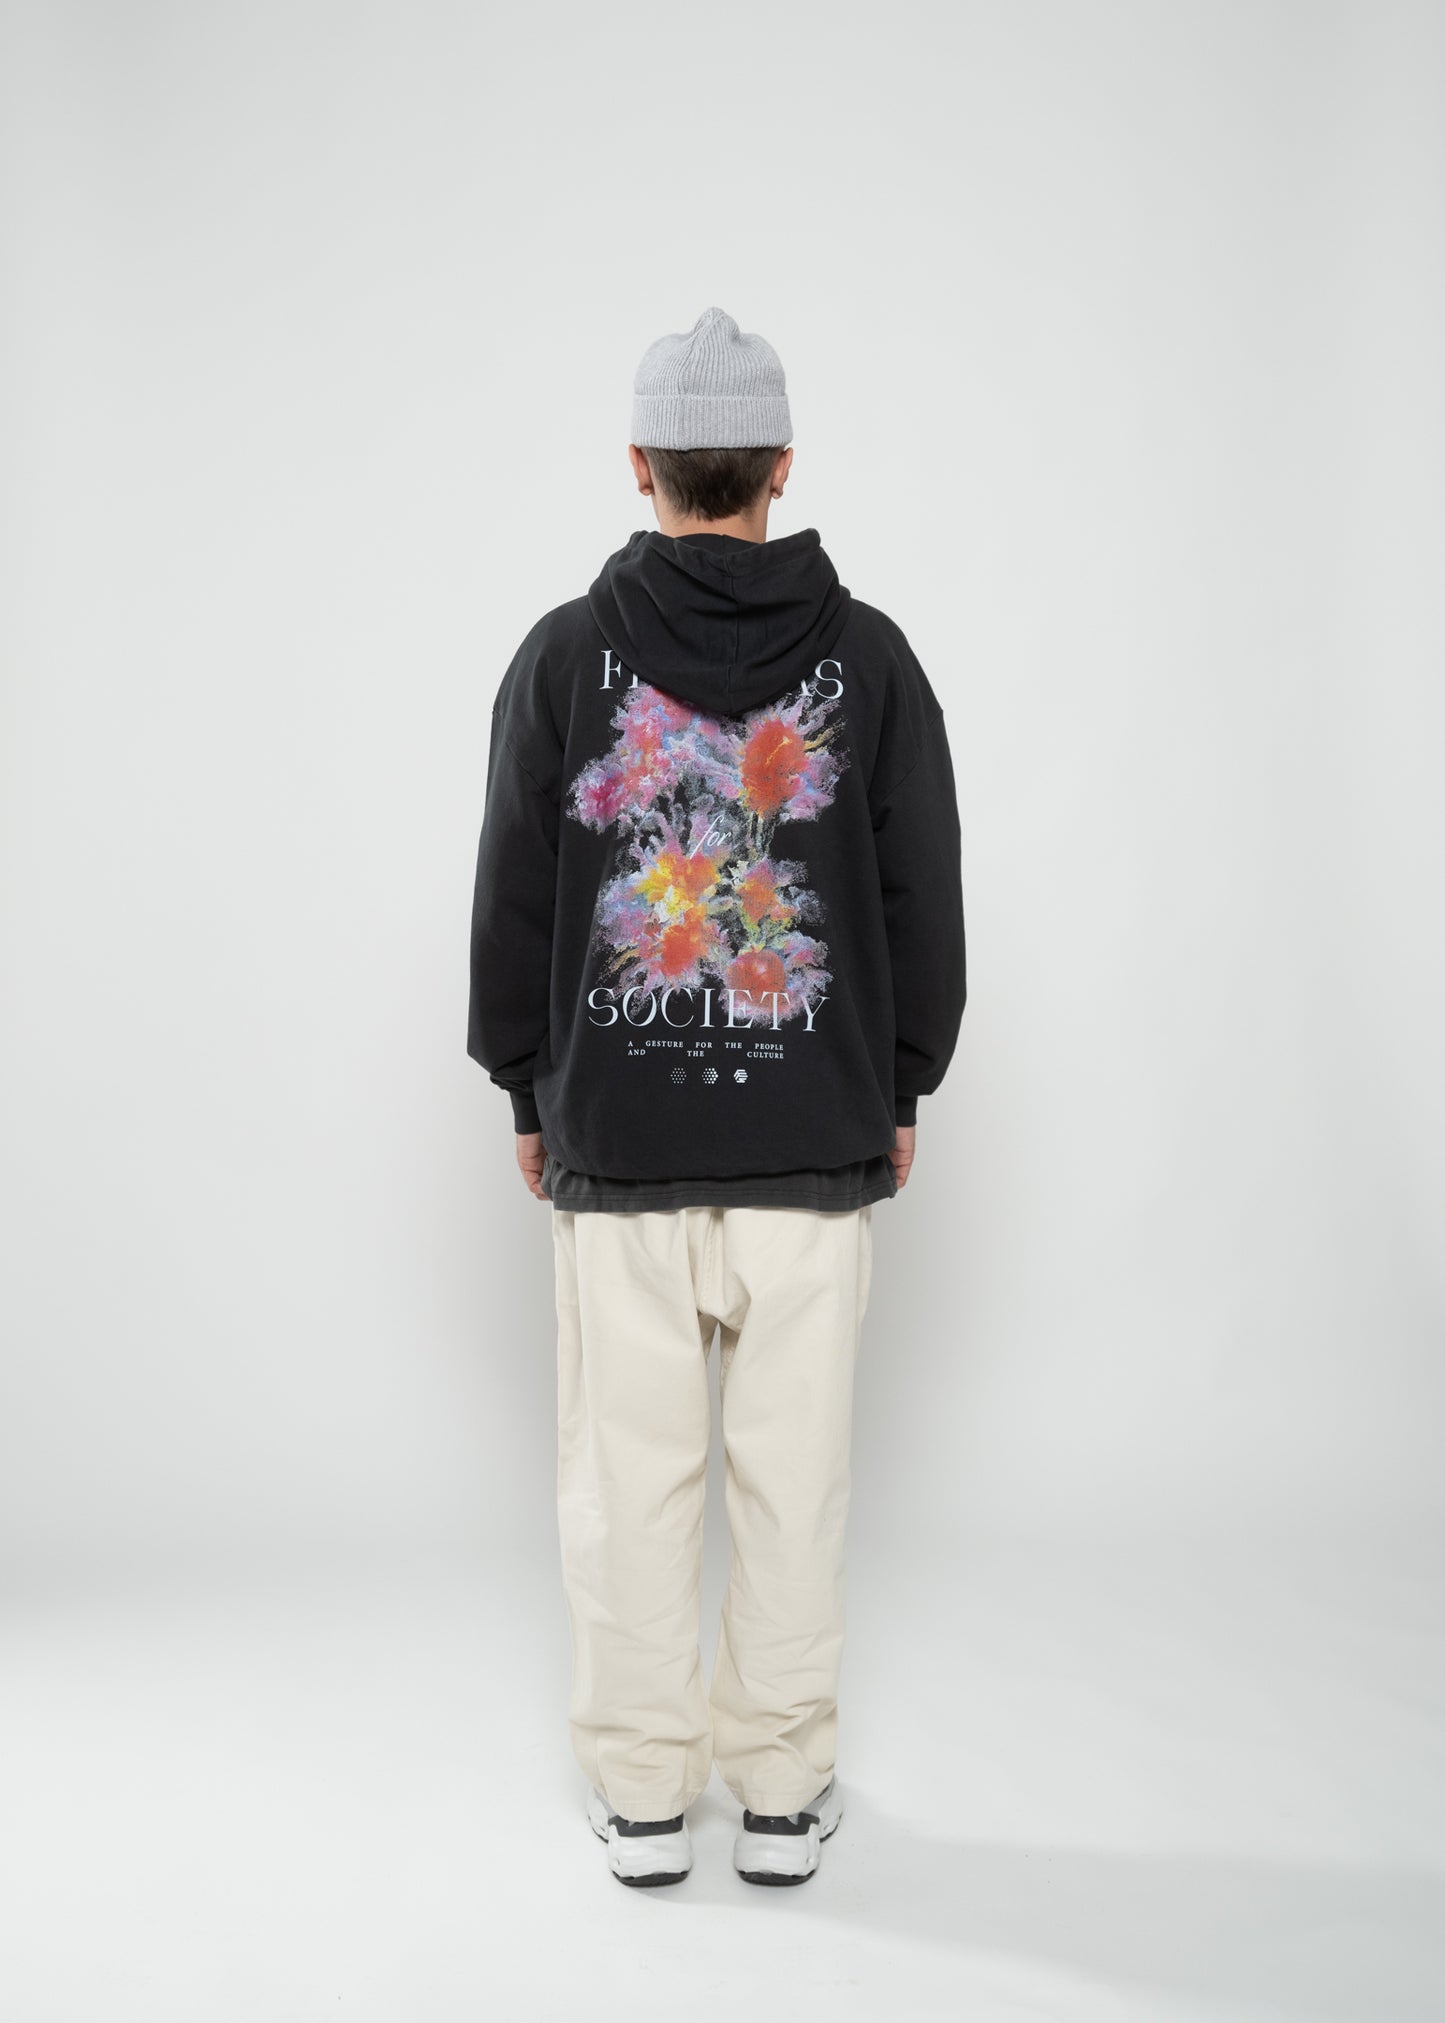 Flowers for Society garden hoodie vintage black back view worn by model Ben